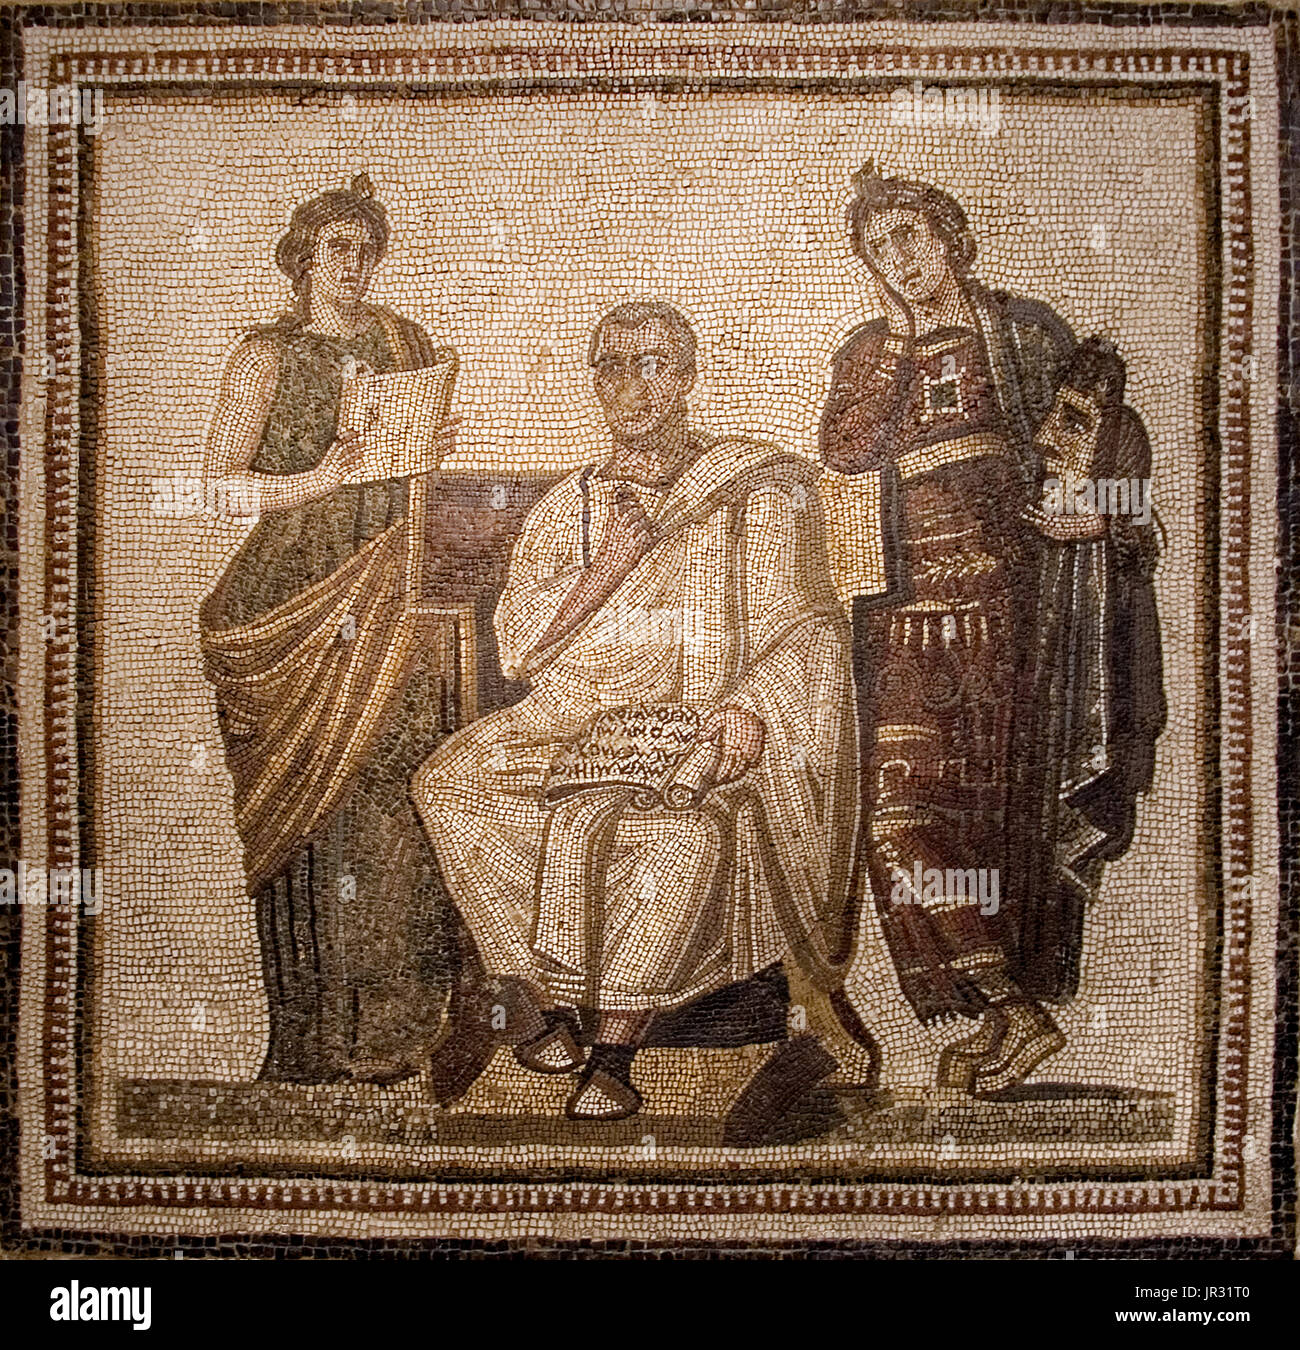 Virgil, wearing a toga and holding a scroll on his lap is attended by two Muses; Clio (history), stands on his left holding a scroll. Melpomene (tragedy), stands to the right with a tragic mask. The scroll is open at Aeneid I, line II: :O Muse! the cause and the crimes relate, What Goddess was provoked, and whence her hate!' Publius Vergilius Maro (70-19 BC), usually called Virgil or Vergil in English, was an ancient Roman poet of the Augustan period. Virgil is ranked as one of Rome's greatest poets. His Aeneid has been considered the national epic of ancient Rome. Modeled after Homer's Iliad  Stock Photo